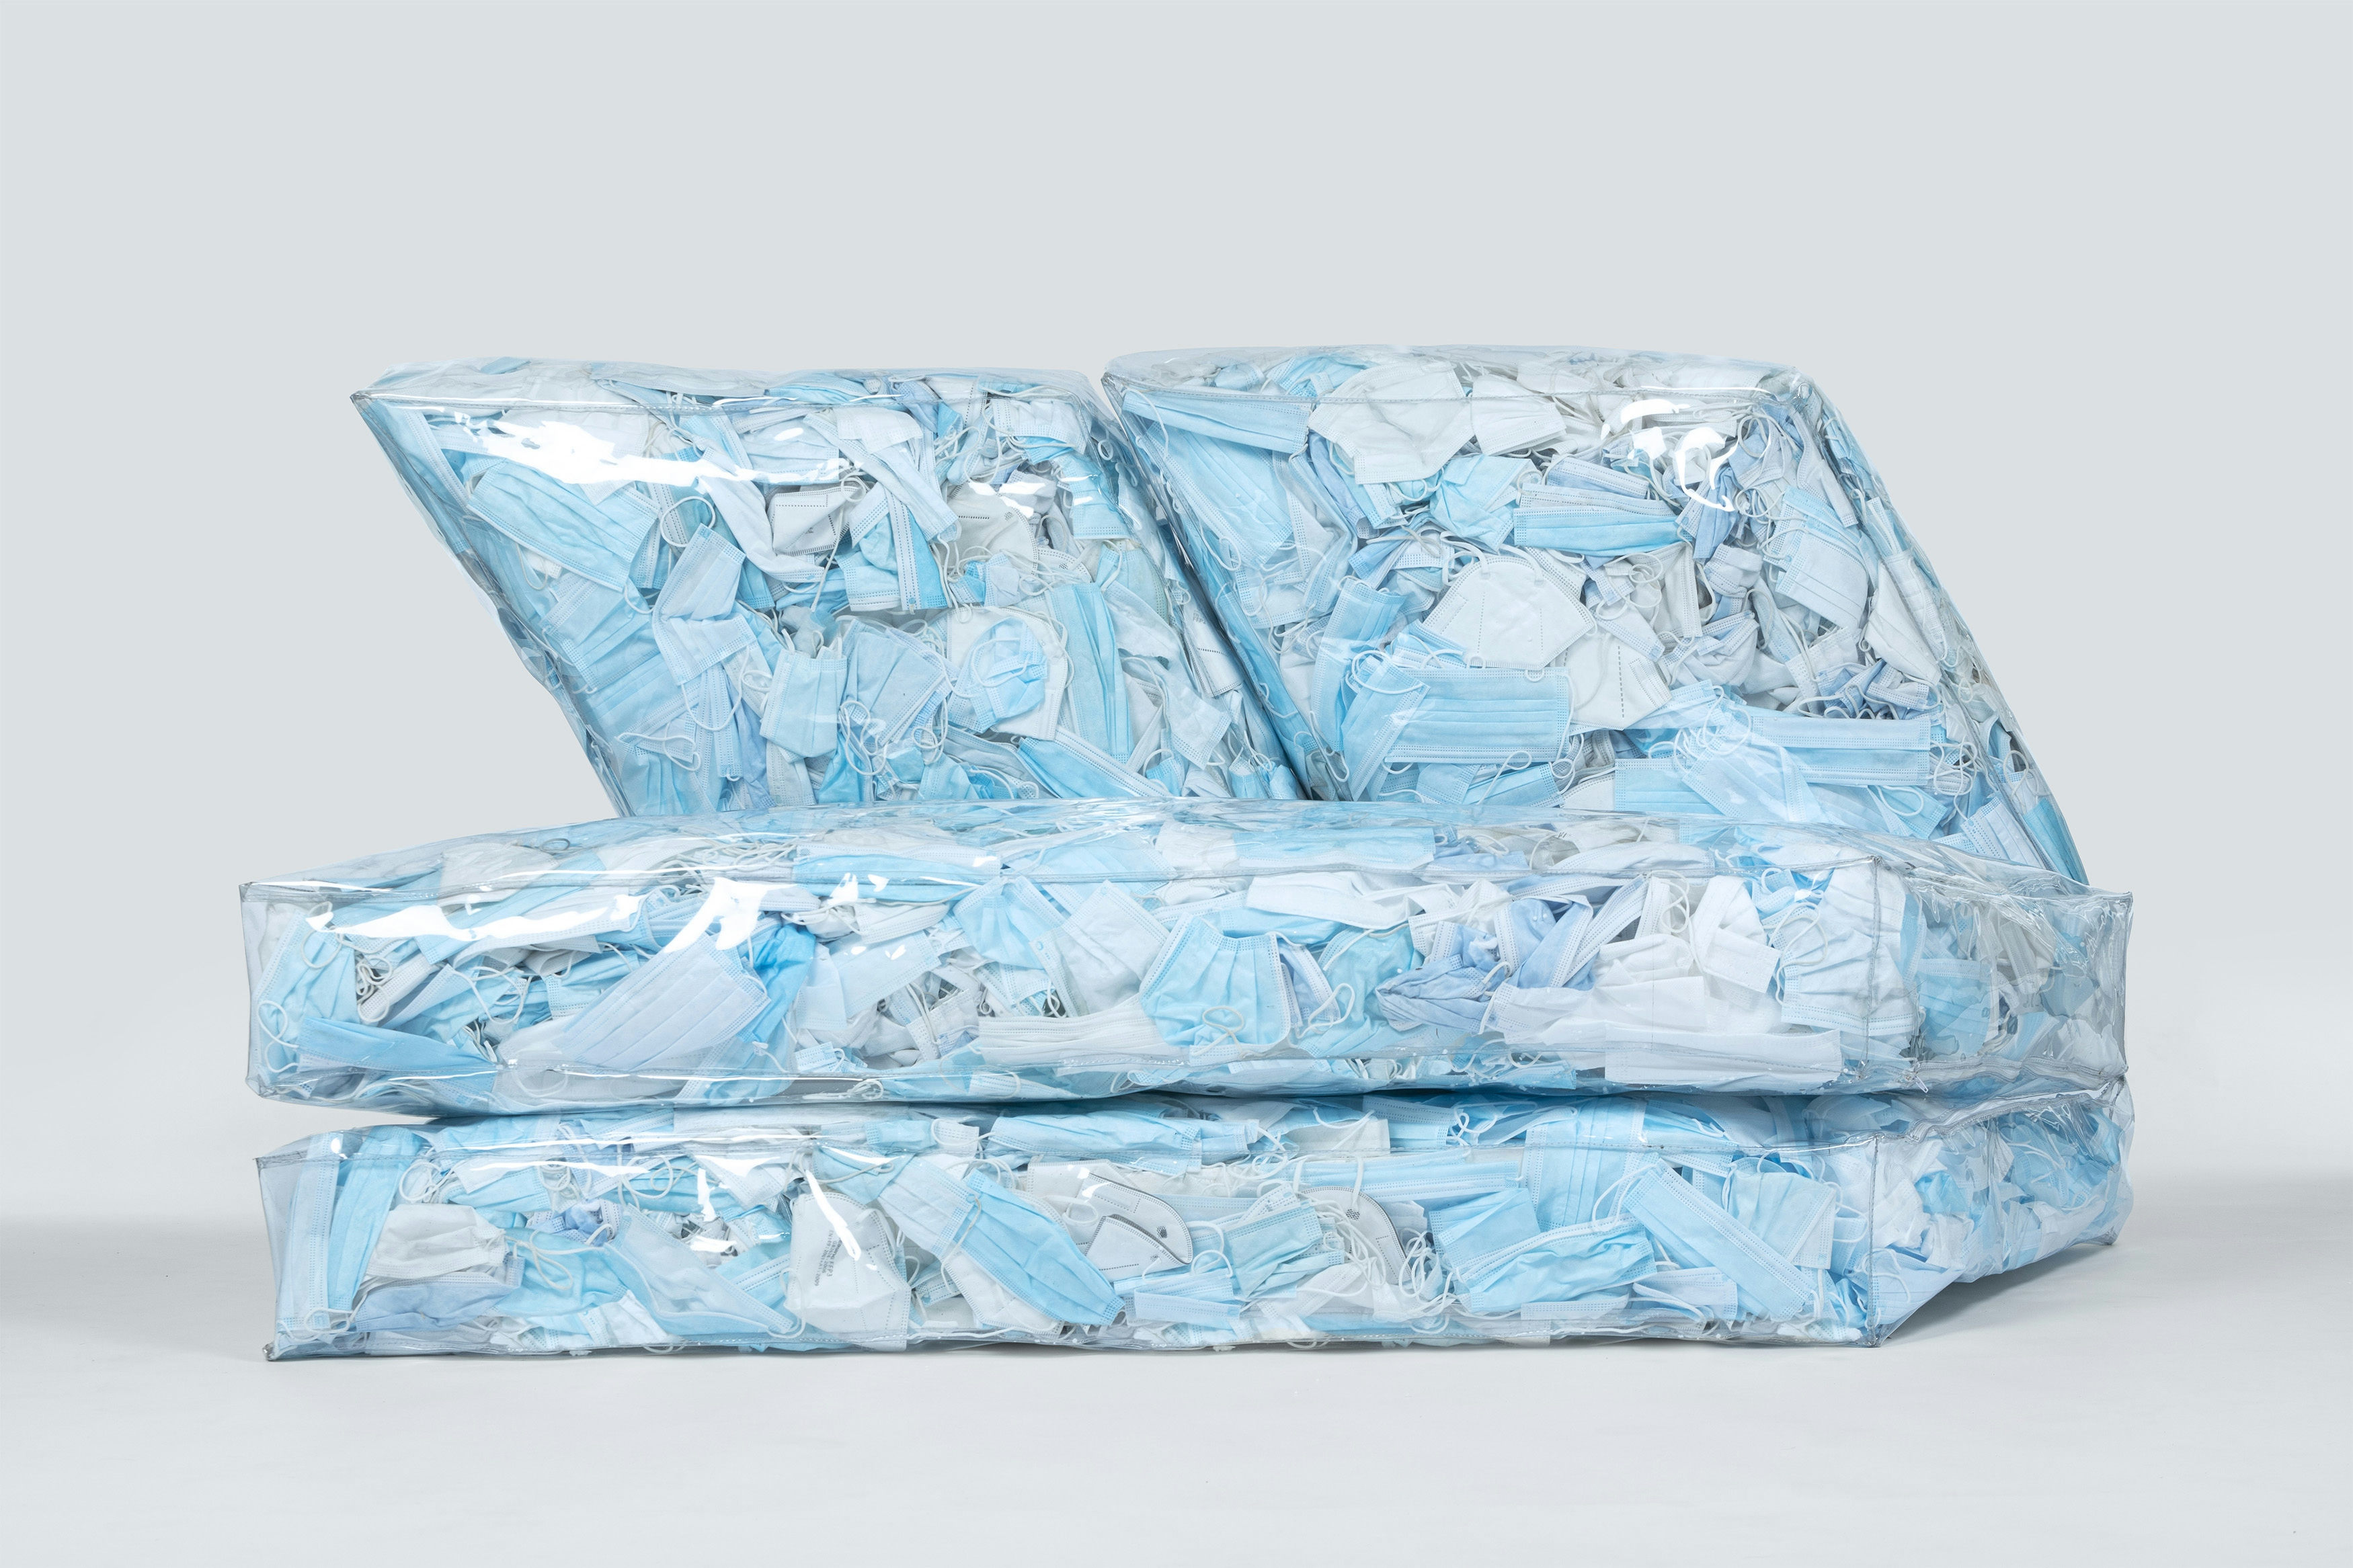 Couch-19 - An iceberg-shaped modular pouf made with single-use masks collected from the streets